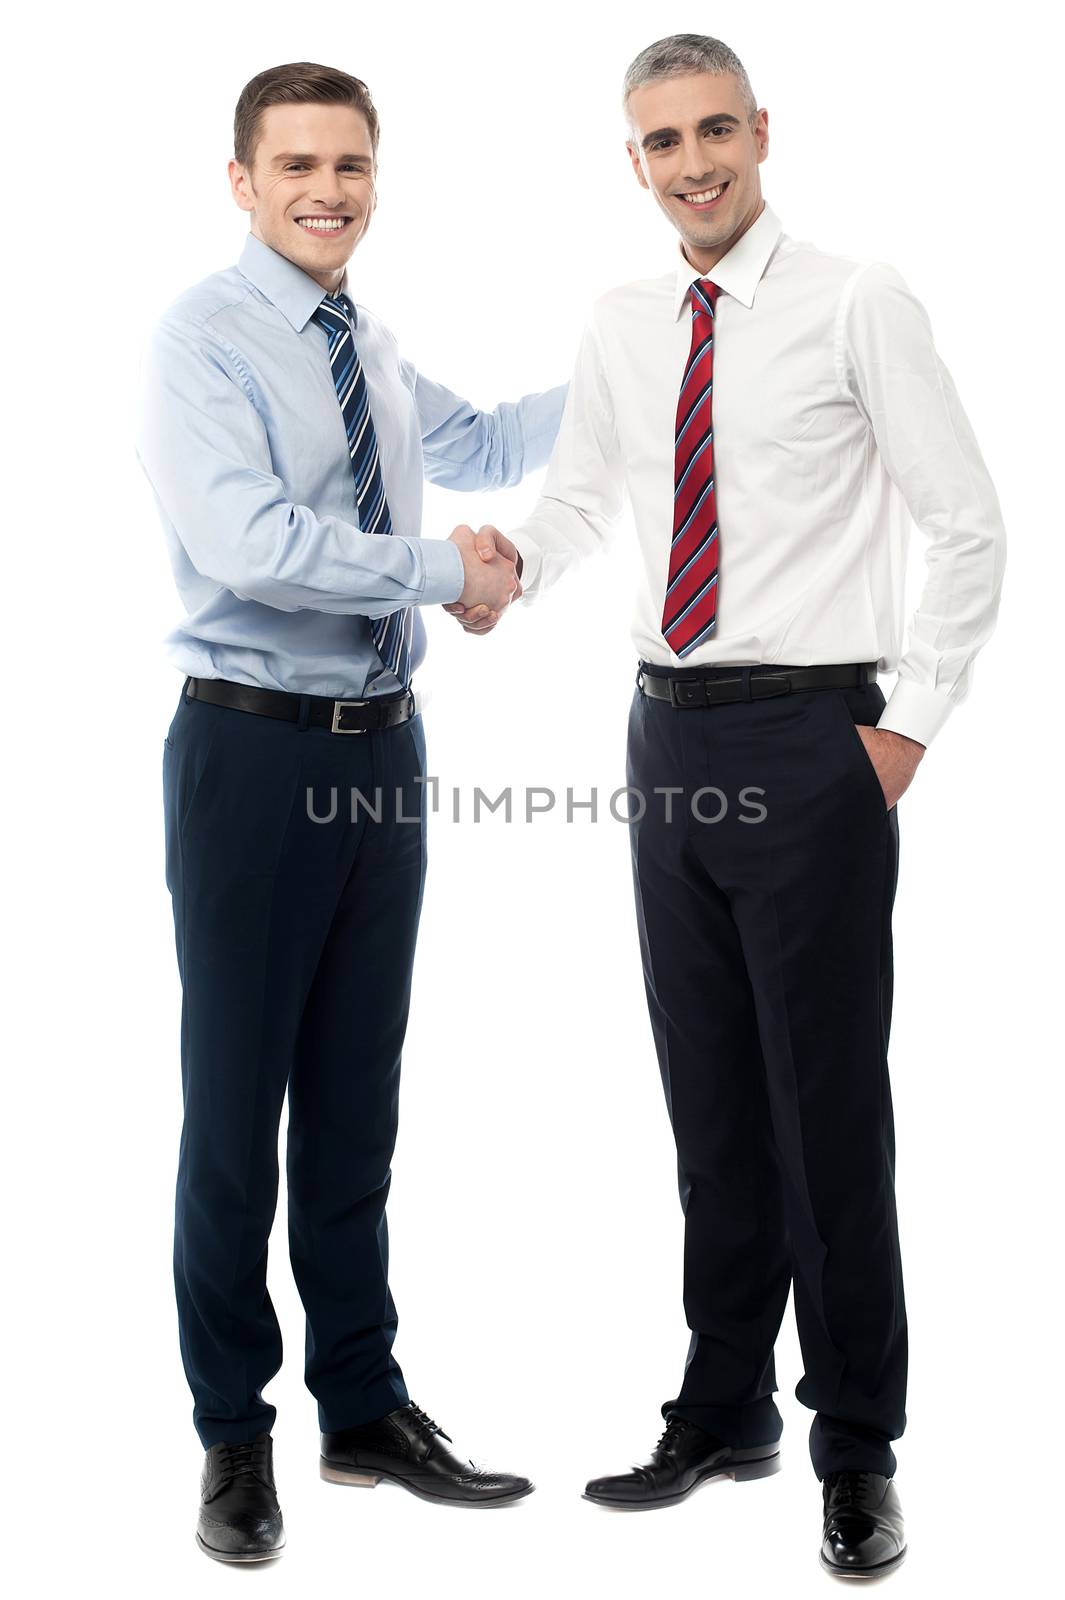 Young business people shaking hands after a deal